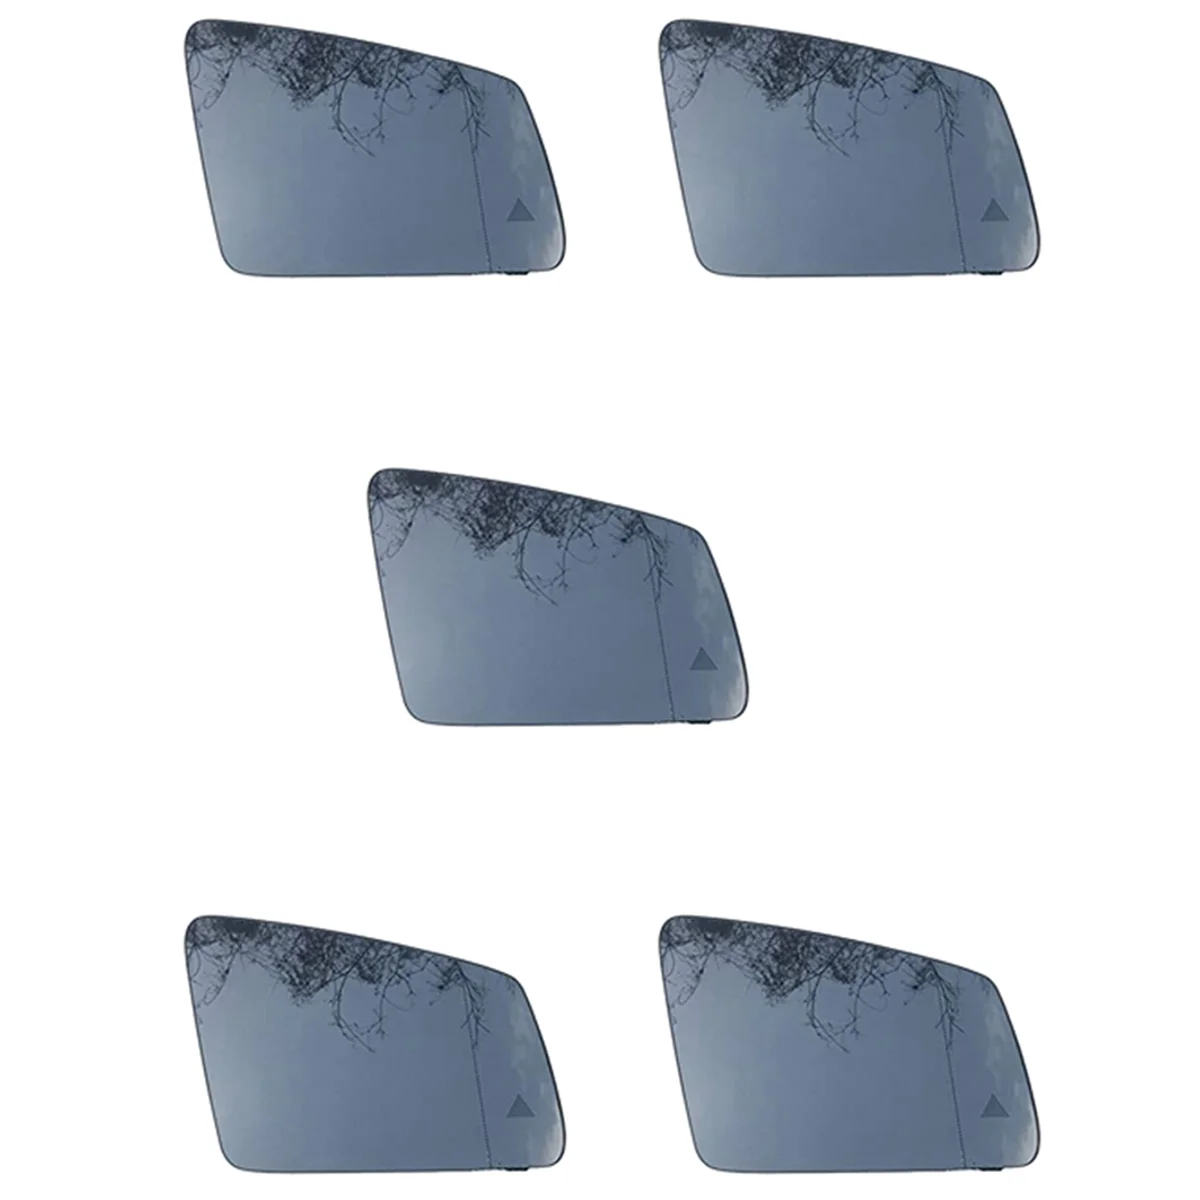 

5X Car Replacement Heated Blind Spot Warning Wing Right Rear Mirror Glass for Mercedes-Benz Gla GLK W204 W212 W221 09-18